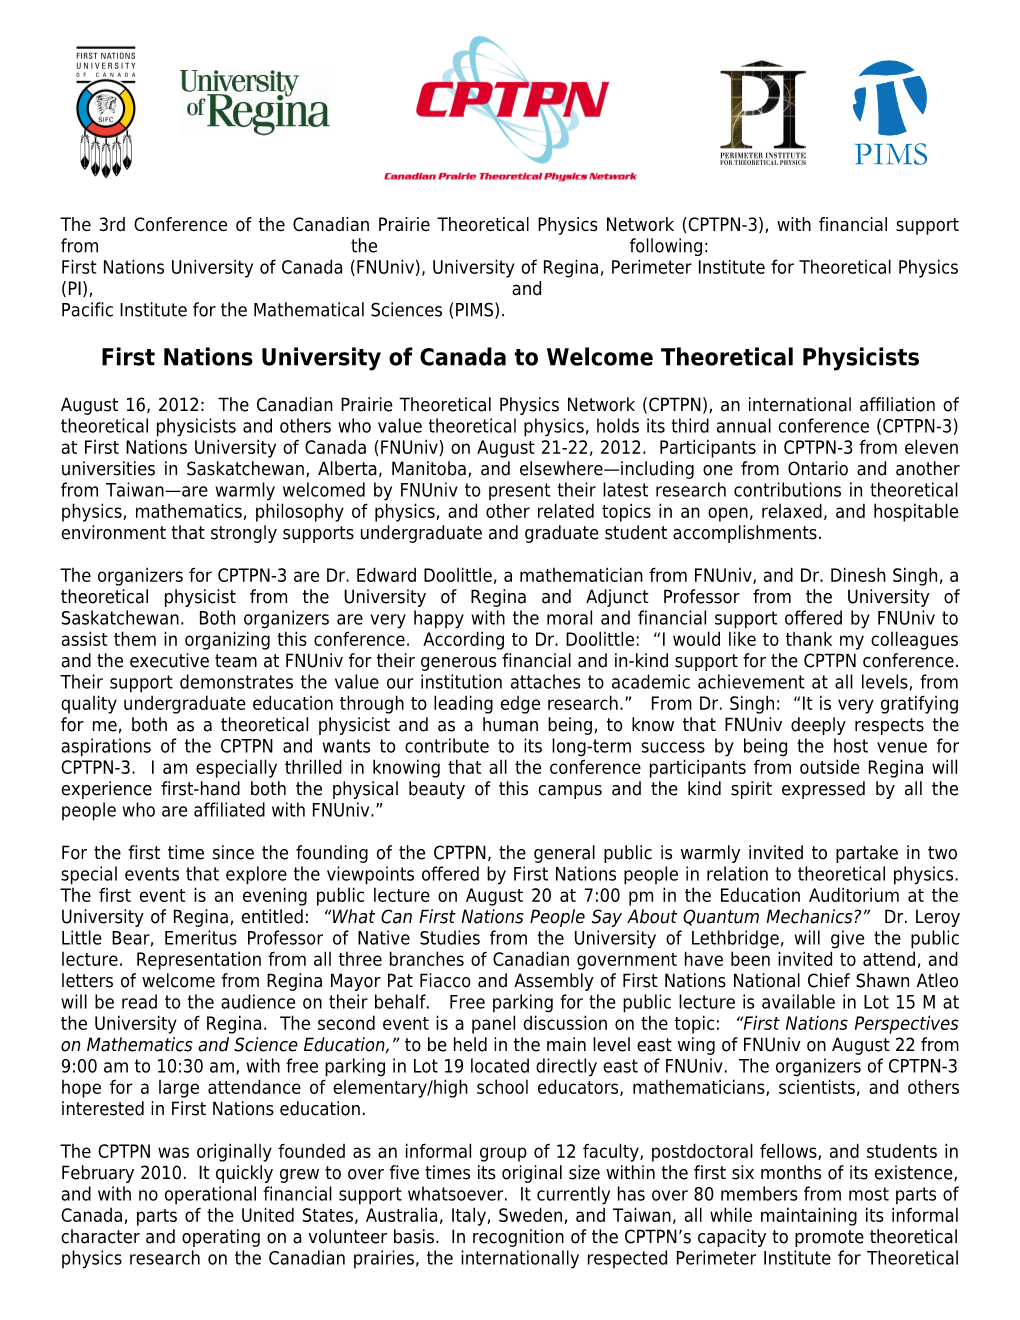 First Nations University of Canada to Welcome Theoretical Physicists